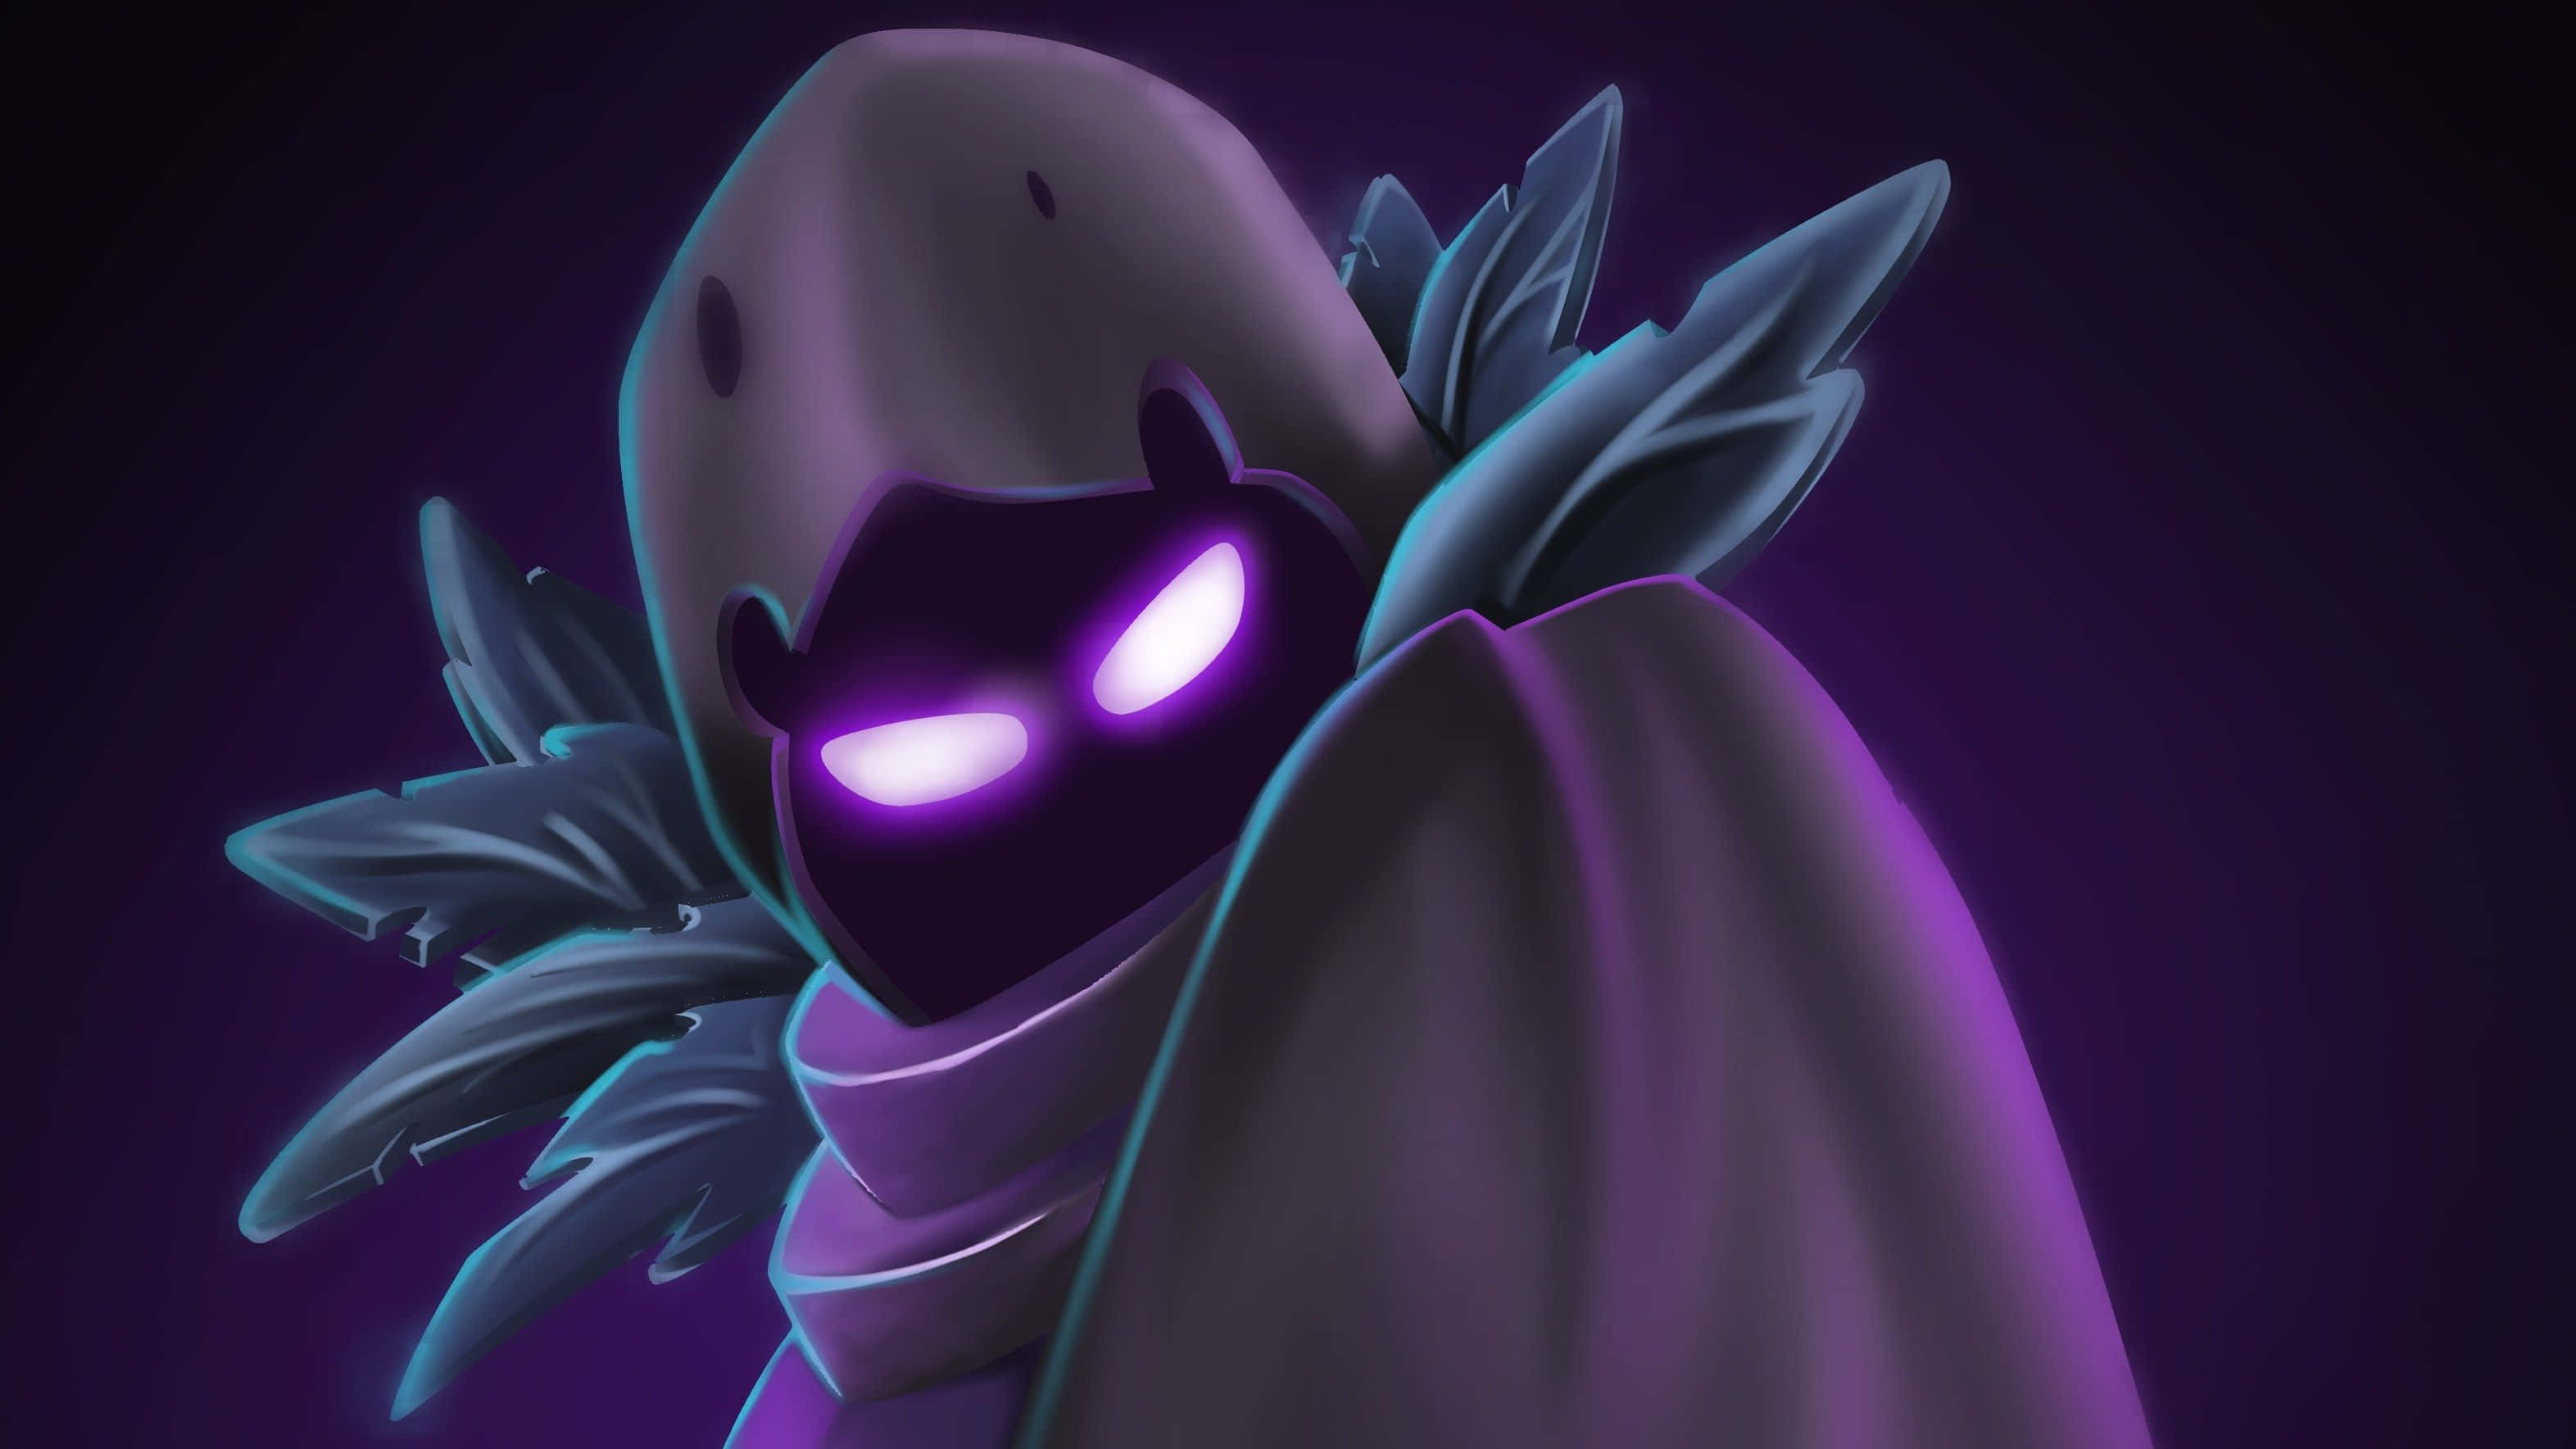 “Bring dark forces to the battlefield with Raven from Fortnite." Wallpaper